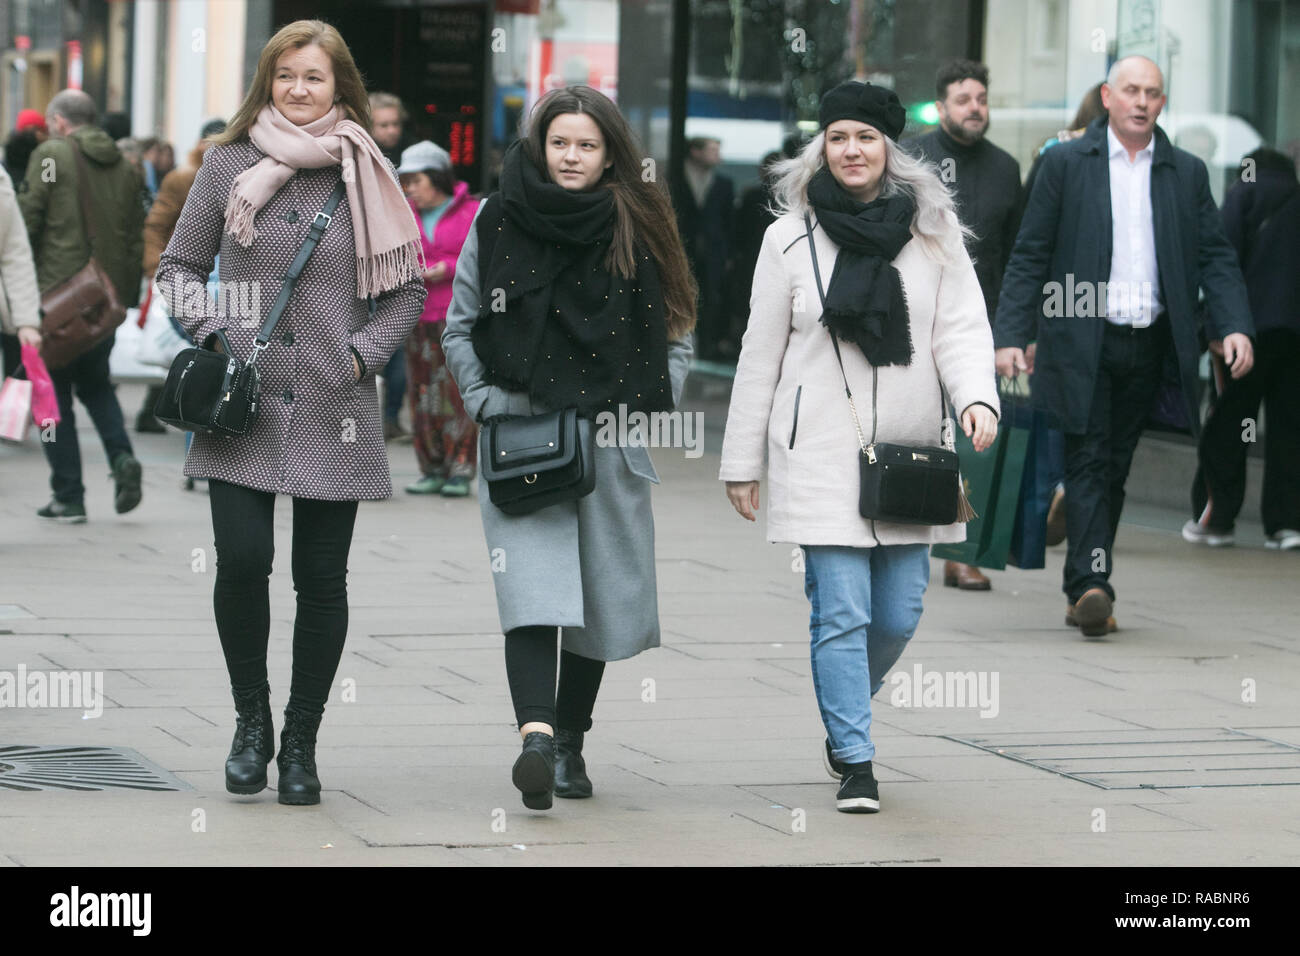 A woman dresses in warm clothes against the cold on Oxford Street